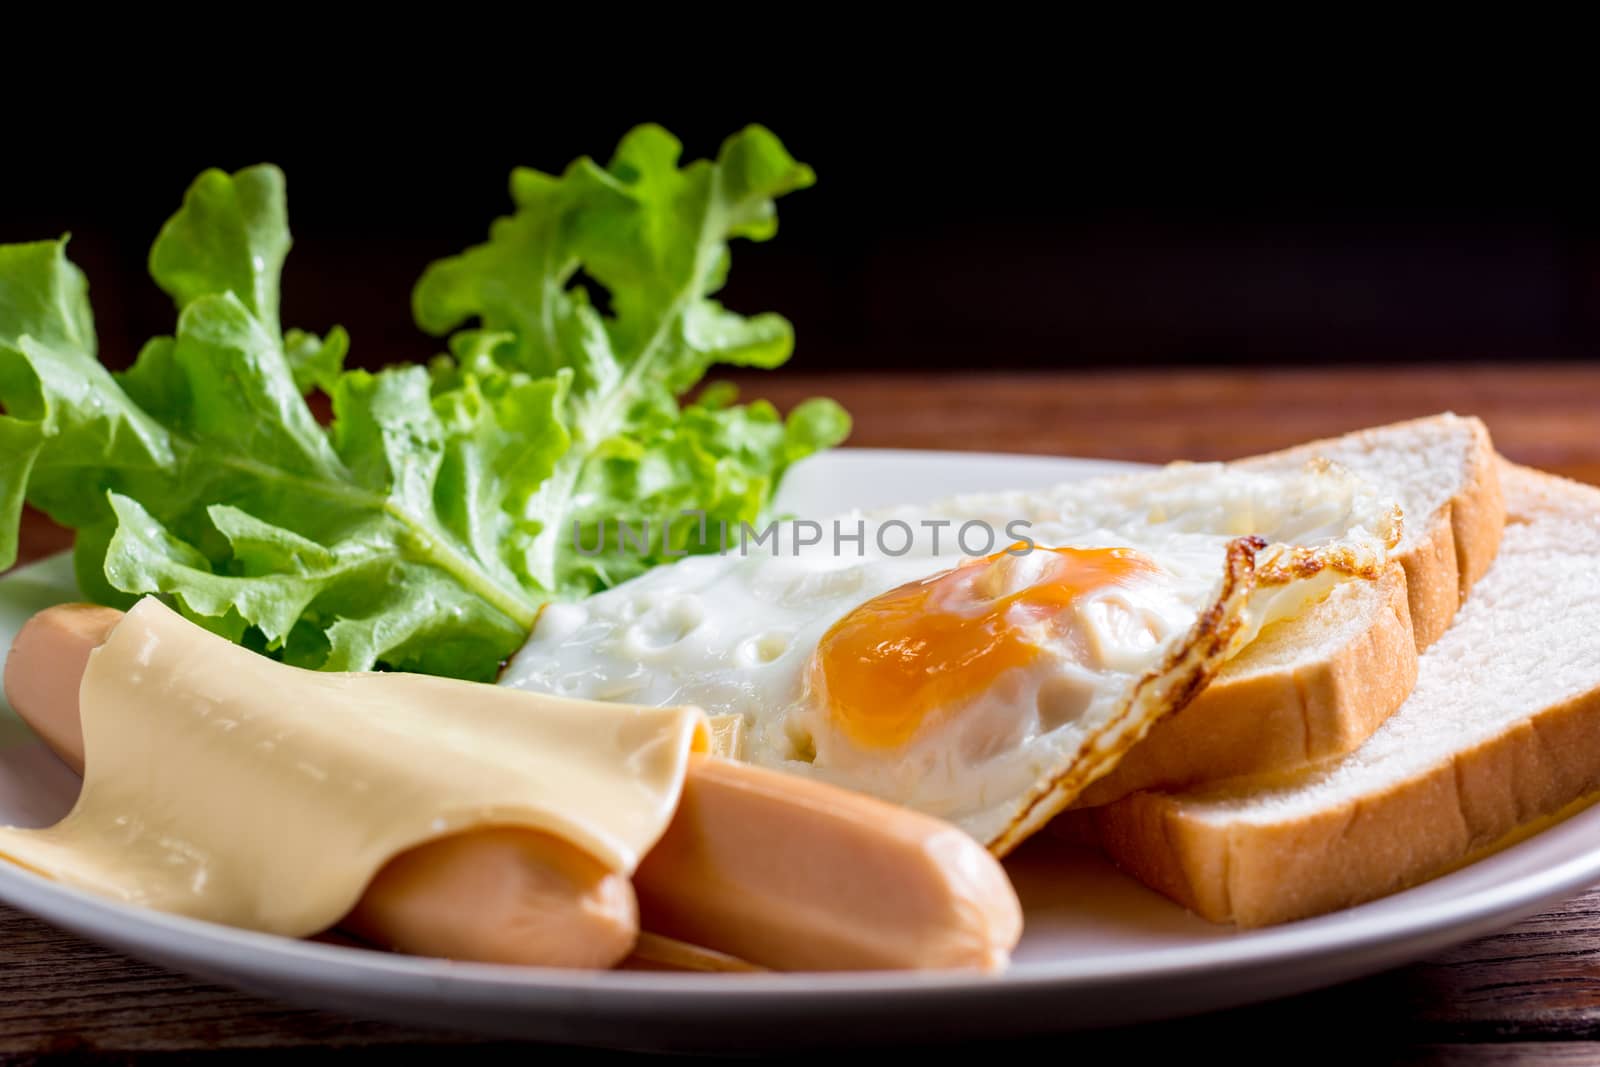 American breakfast concept. Fried egg with sliced bread, boiled chicken sausage, cheddar cheese, and fresh lettuce on a white plate in the home kitchen. Homemade food in the morning.